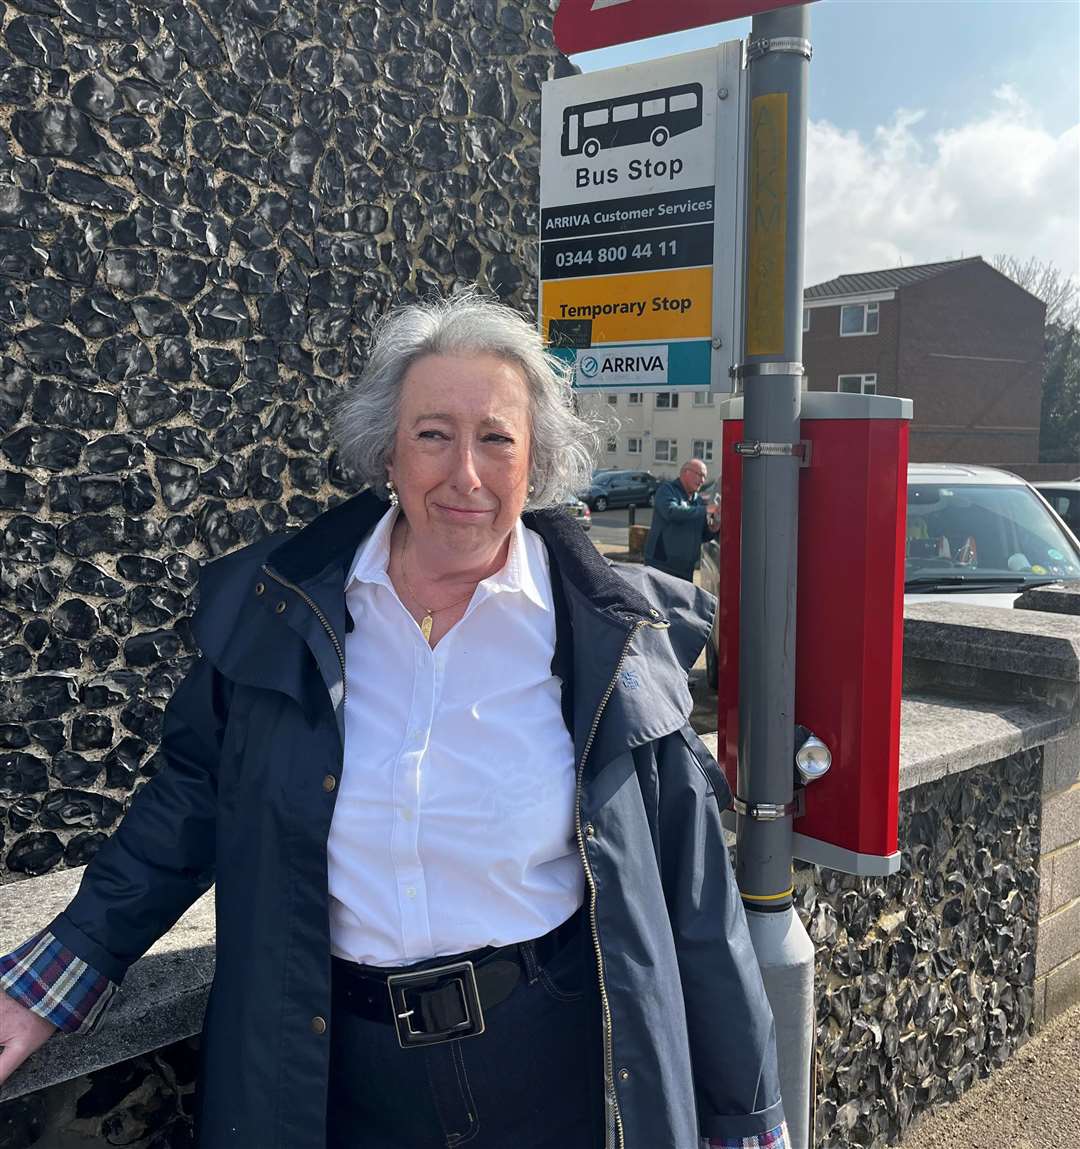 Susy Balmanno is frustrated a vital direct bus route to Darent Valley Hospital was stopped